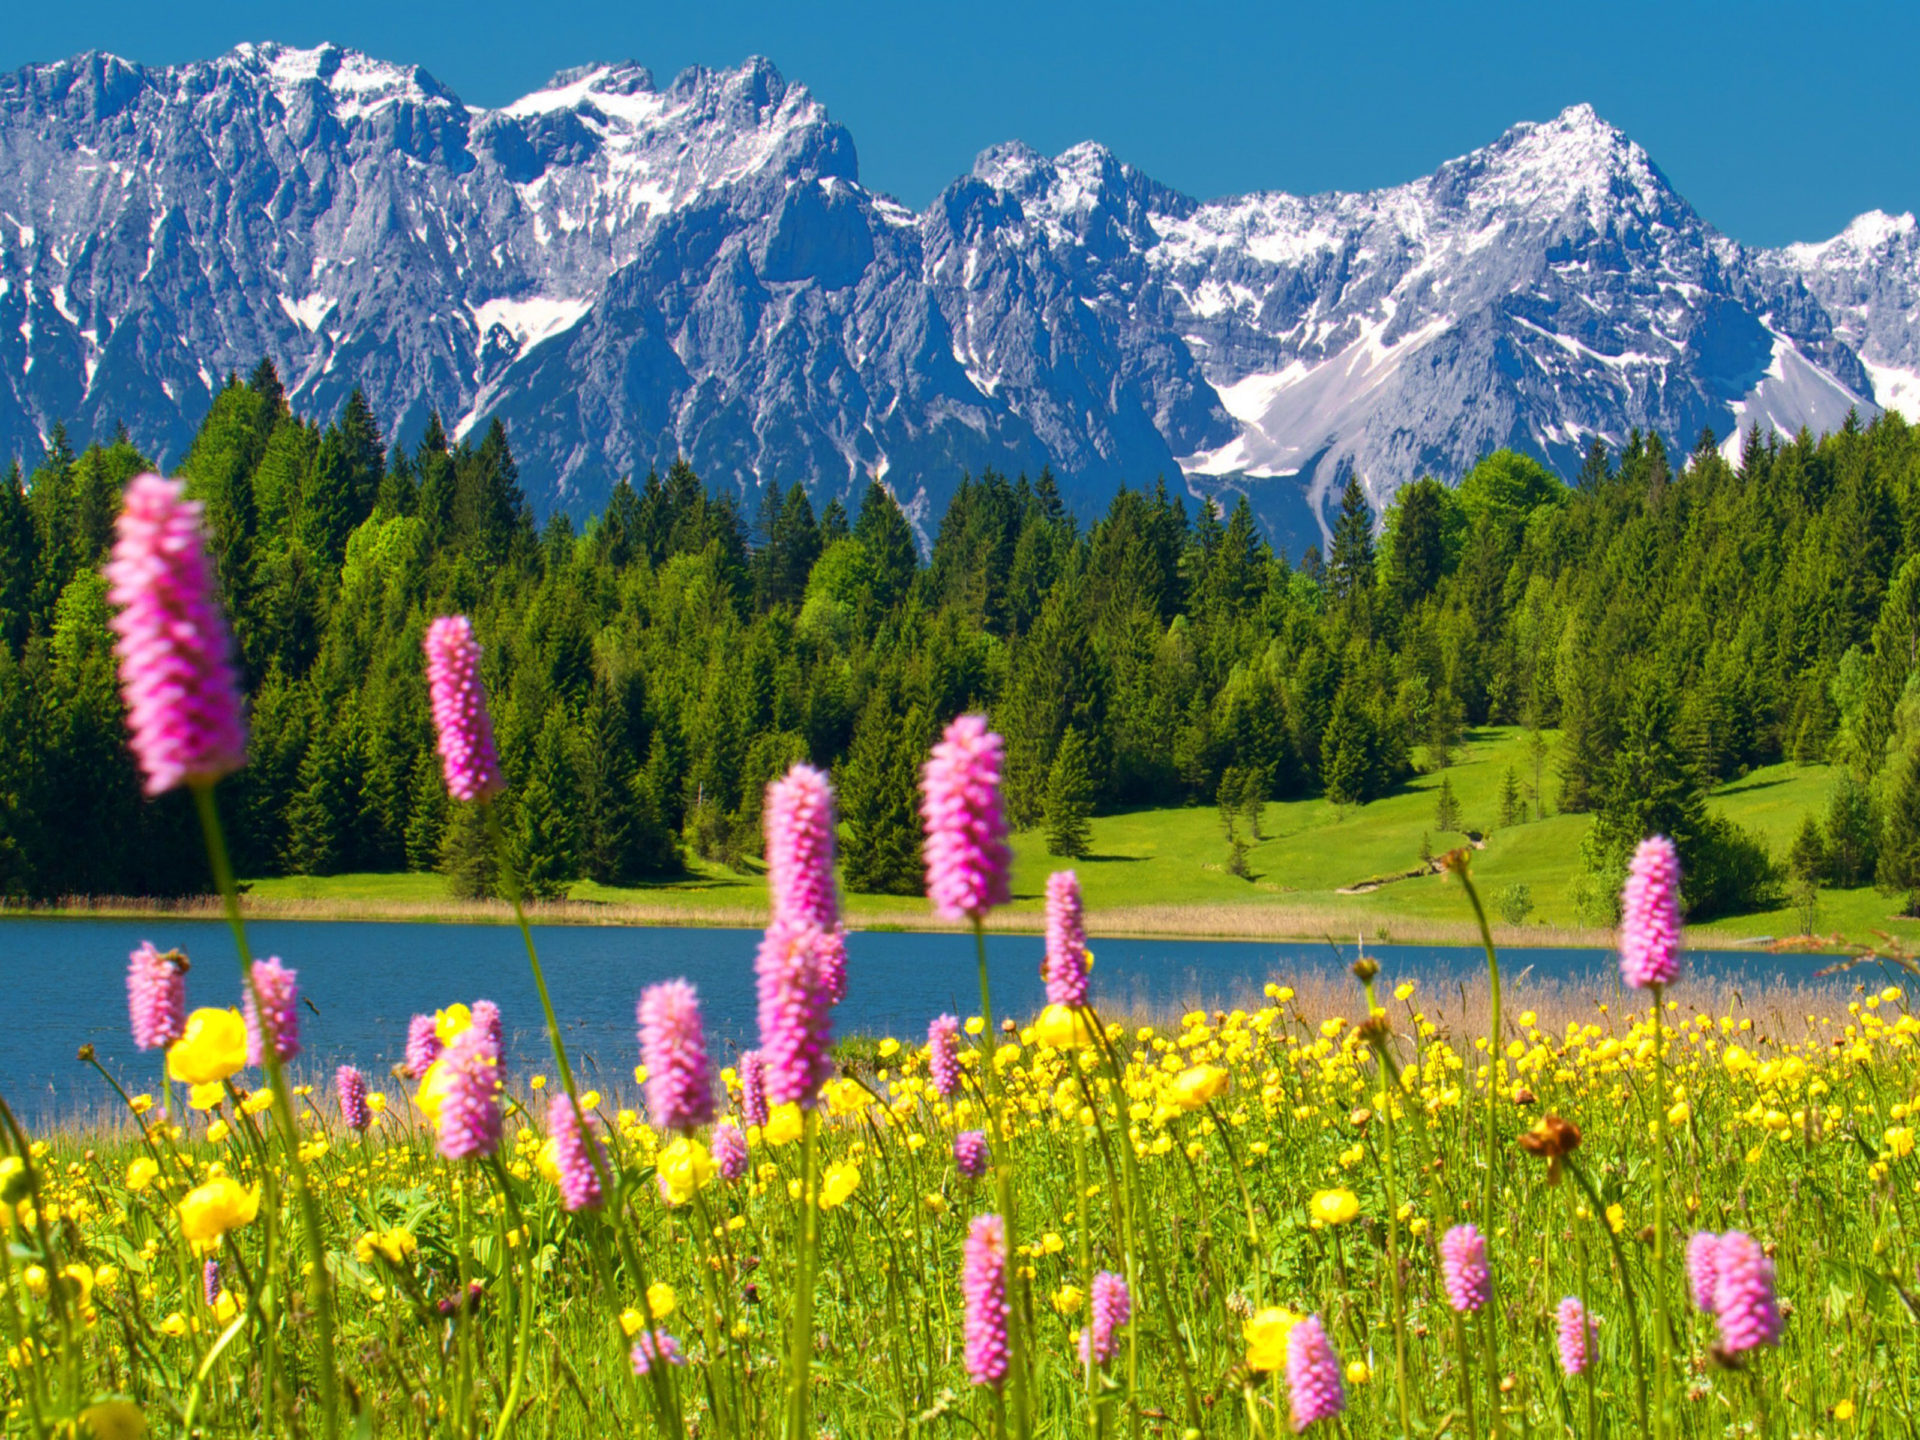 Alps Snowy Mountain Peaks Blue Sky Green Forest With Trees And Pine Lake Yellow And Pink Spring Flowers Mountain HD Wallpaper For Desktop, Wallpaper13.com